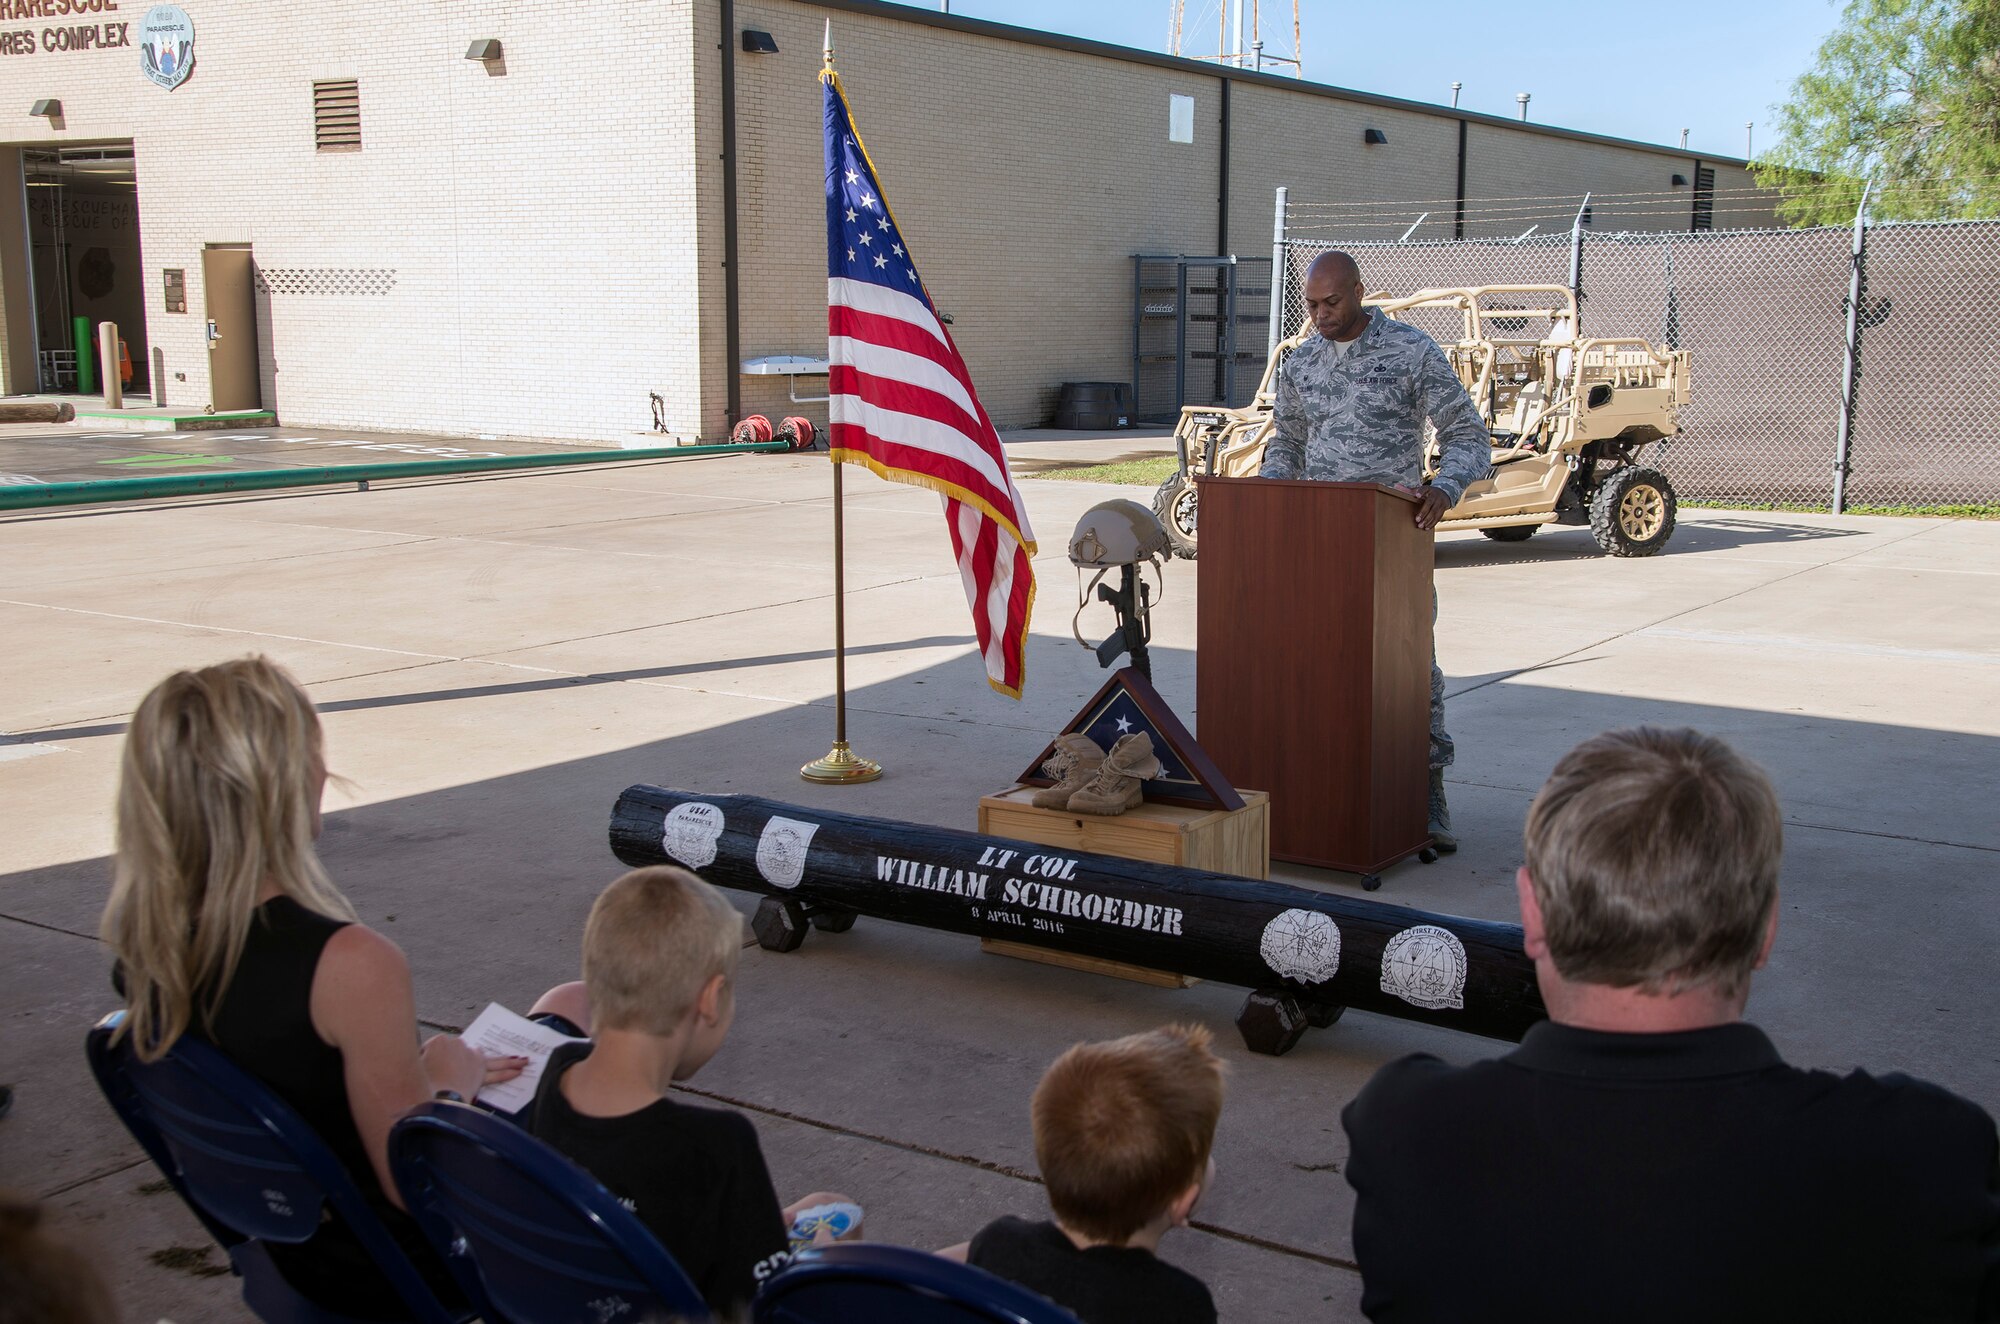 Col. Roy Collins, 37th Training Wing commander, prepares to address the crowd during a memorial remembrance ceremony honoring Lt. Col. William “Bill” Schroeder April 7, 2017, at JBSA-Lackland, Texas, Medina Annex. Schroeder’s unit honored his legacy renaming a drop zone as Schroeder DZ and participated in a "Monster Mash" fitness competition, remembrance ceremony and log march. On April 8, 2016, Schroeder recognized a perilous situation developing and reacted swiftly by putting himself between an armed individual and his first sergeant. In the process, he saved lives of other squadron members while being fatally wounded. Schroeder was posthumously awarded the Airman’s Medal, given to those that distinguish themselves by a heroic act – usually at the volunteer risk of their lives but not involving combat.  (U.S. Air Force photo by Johnny Saldivar)